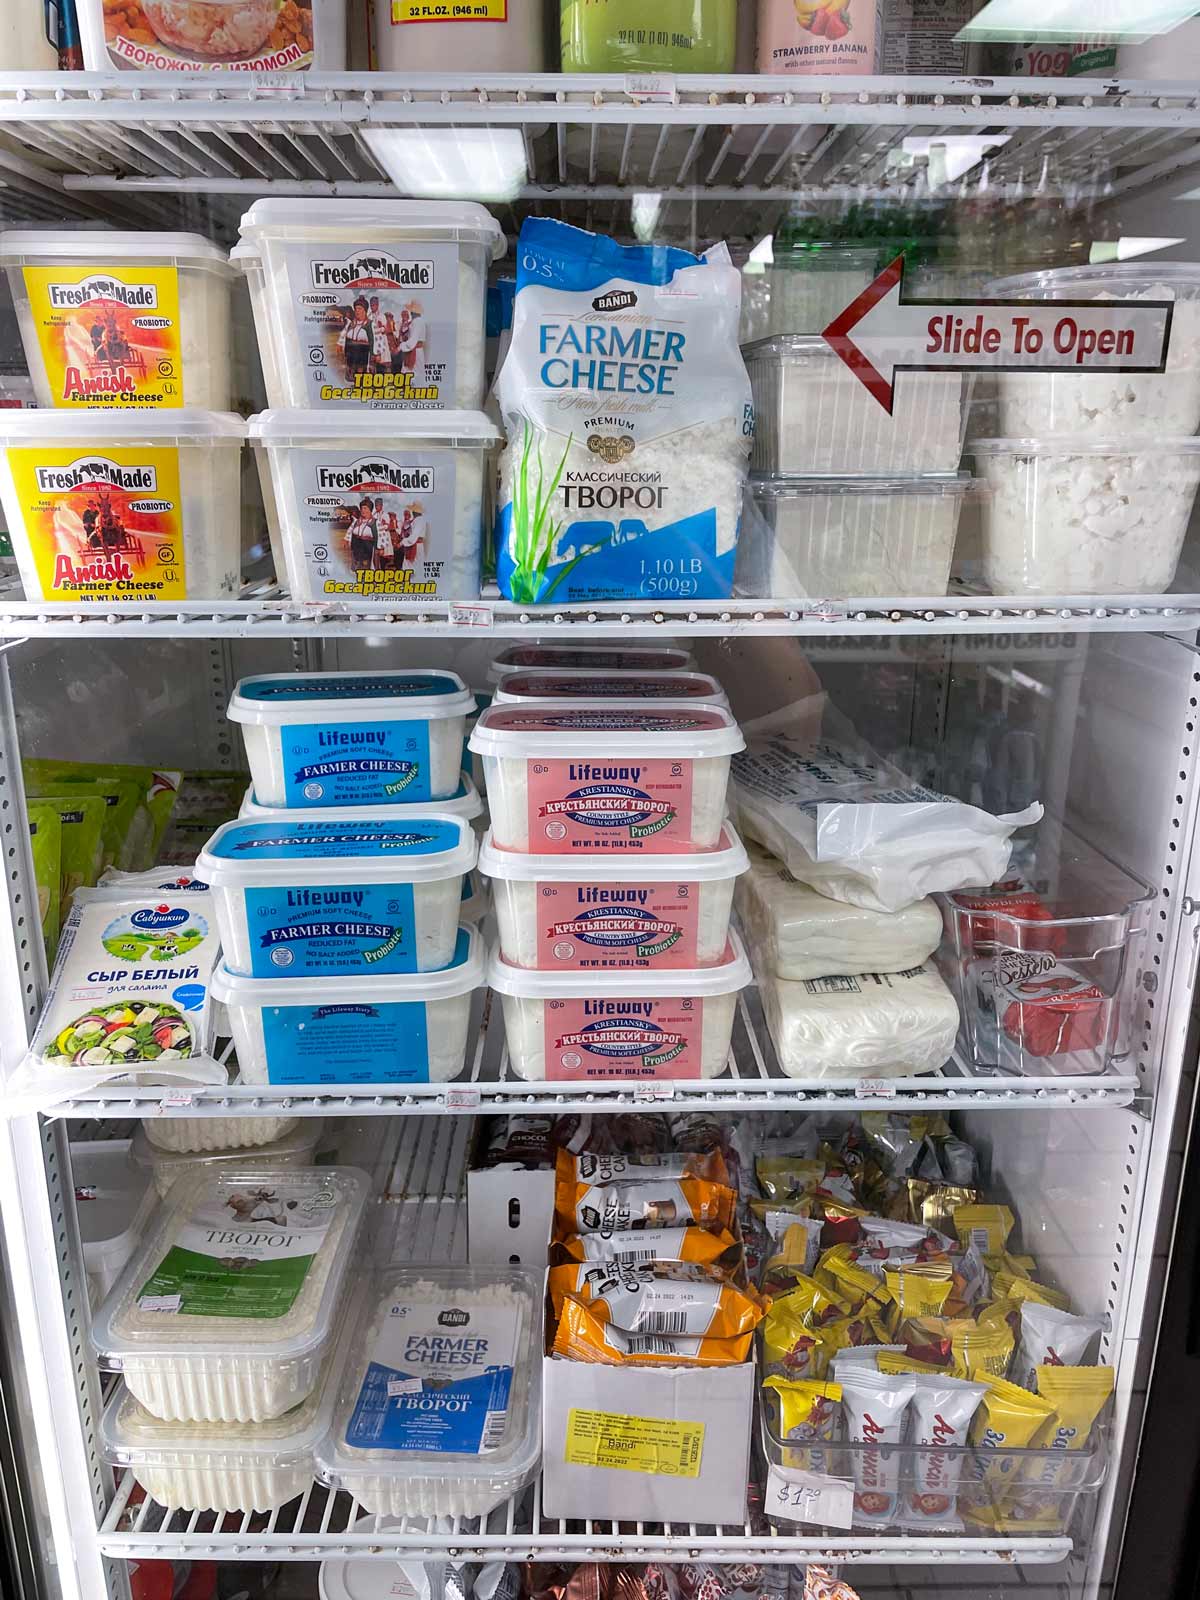 A variety of packages of farmer cheese in a grocery display.